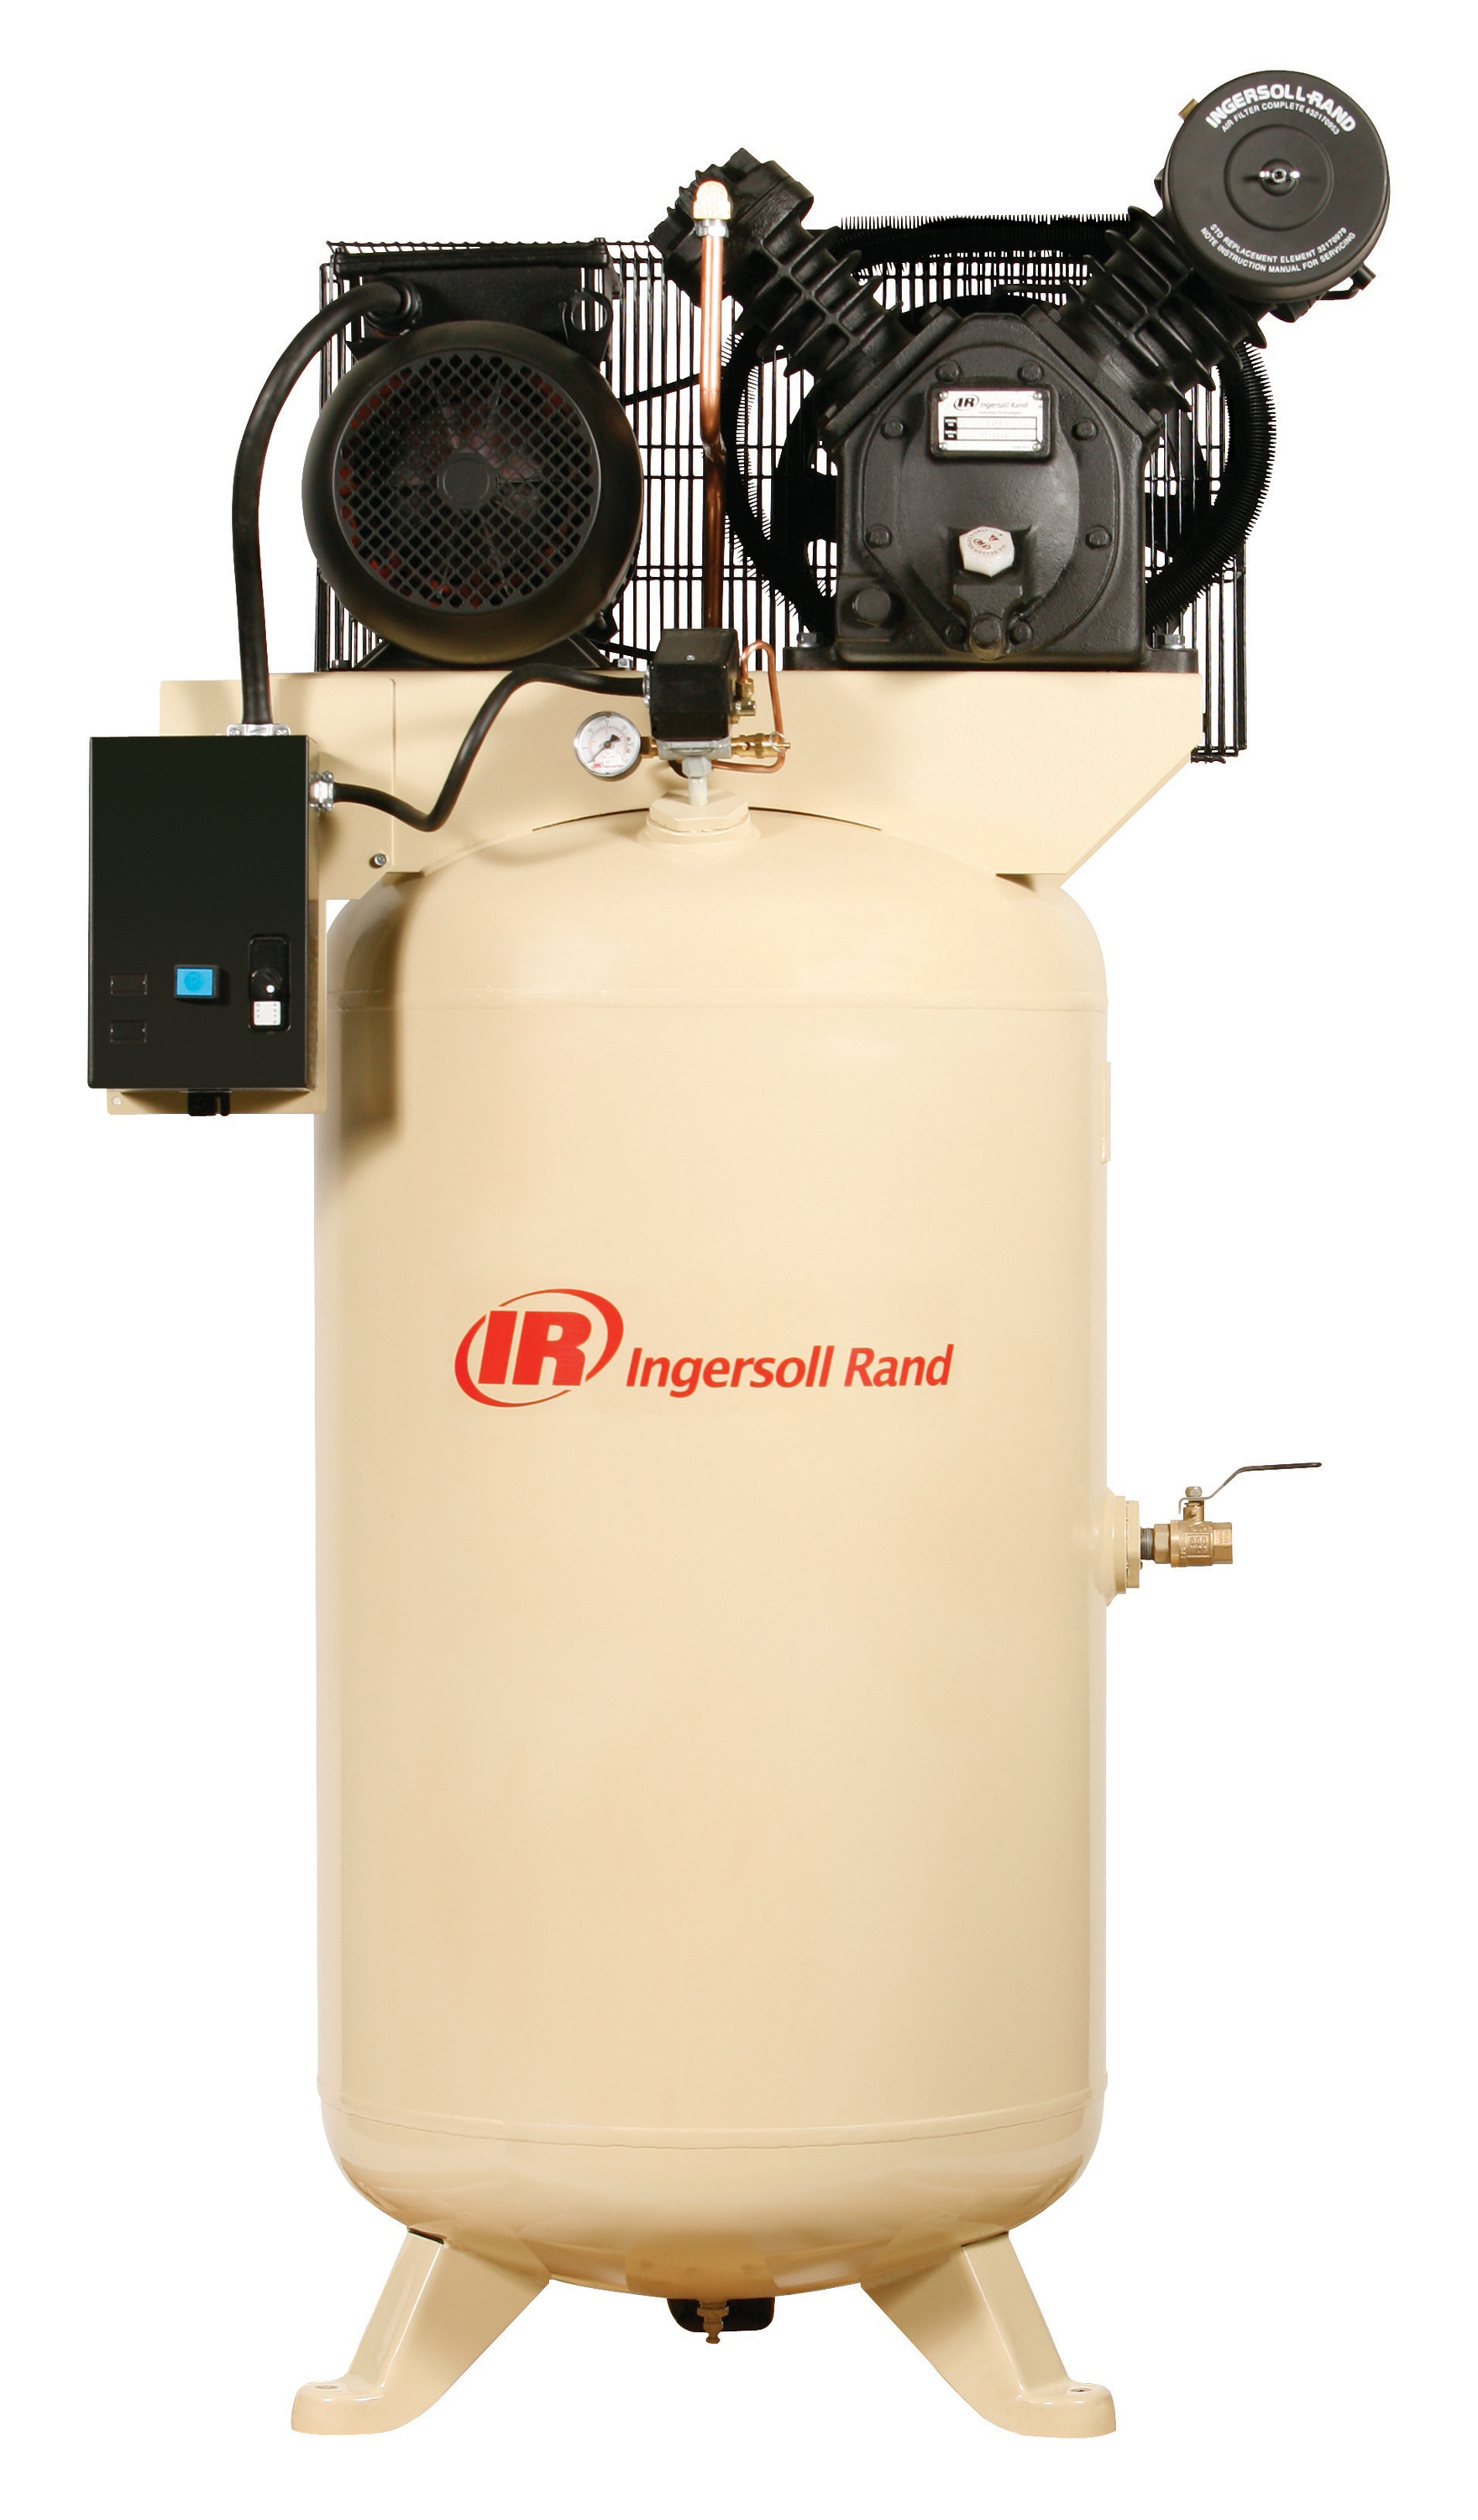 Ingersoll Rand 80-Gallon Two-Stage Air Compressor